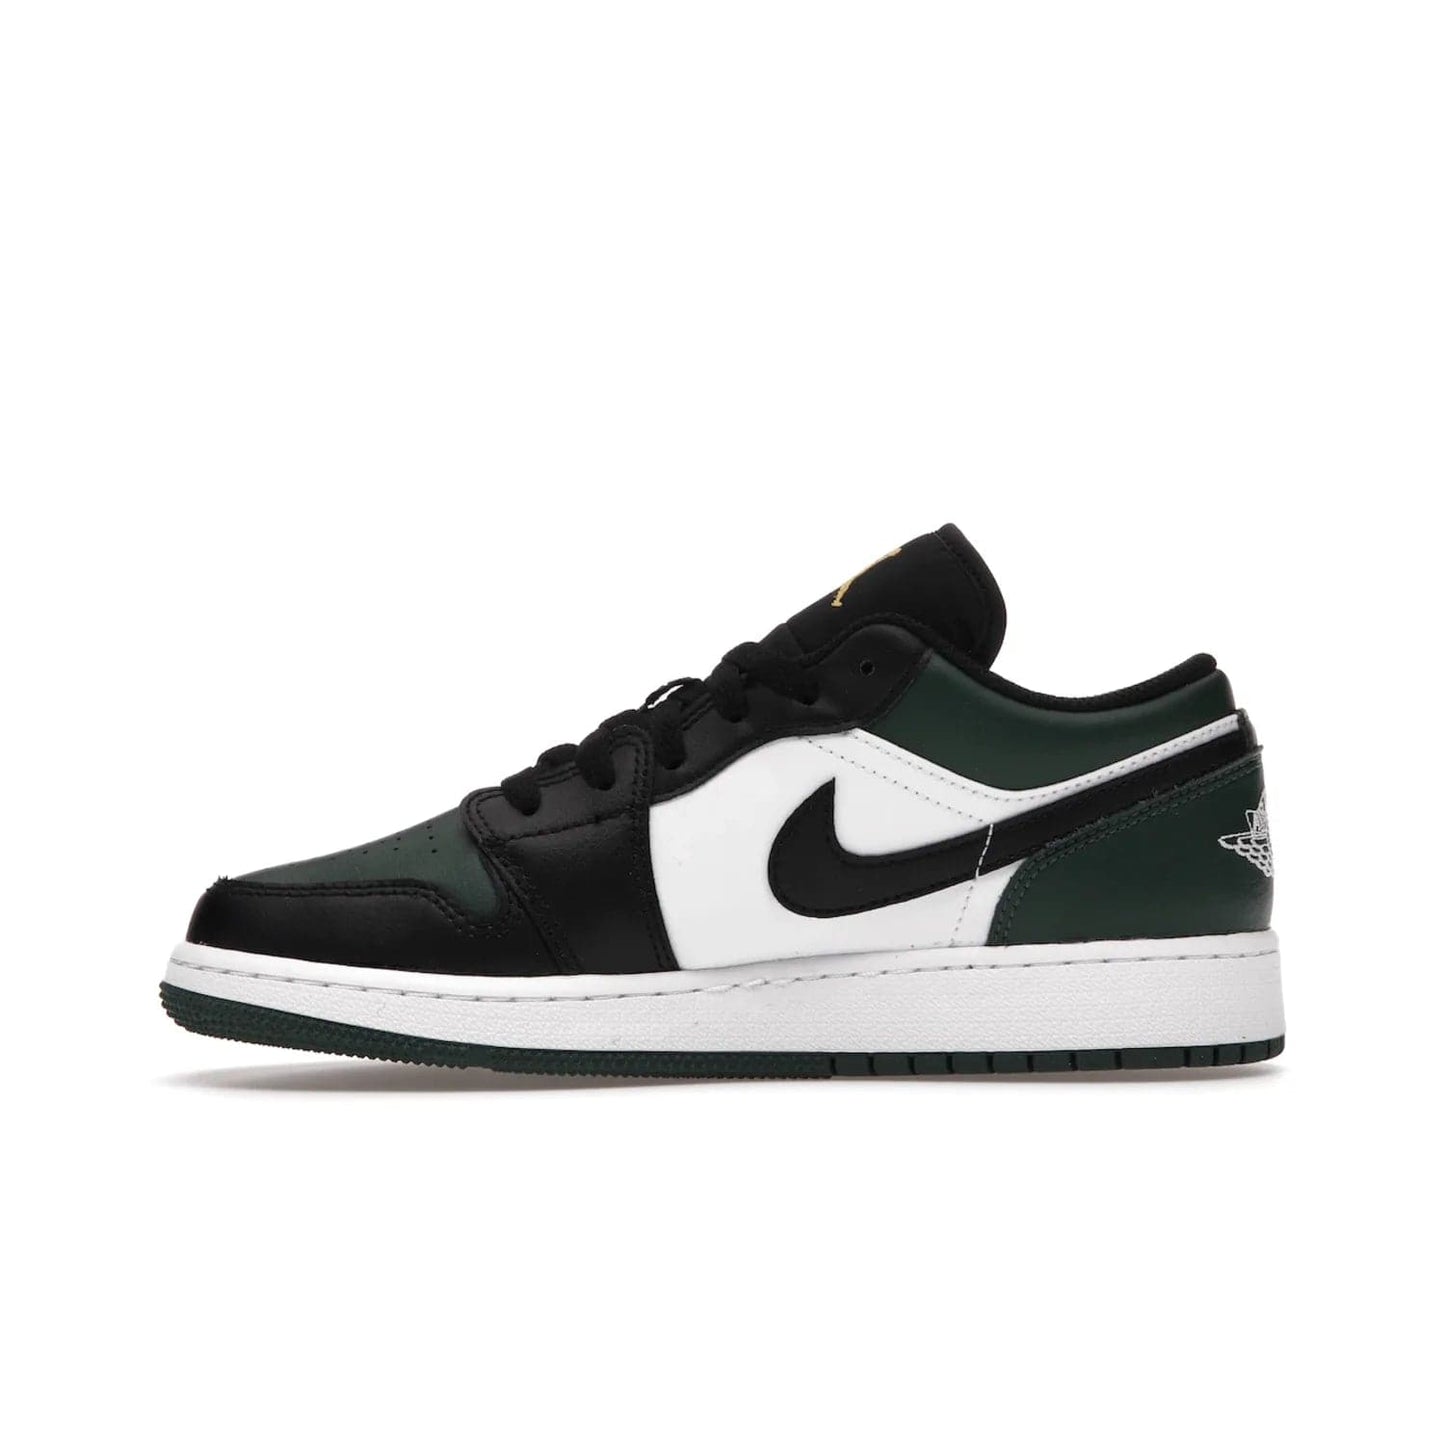 Jordan 1 Low Green Toe (GS) - Image 19 - Only at www.BallersClubKickz.com - Get the perfect low cut Jordans. Shop the Air Jordan 1 Low Noble Green GS shoes with its unique colorway and stencil Jumpman logo. Available October 2021.